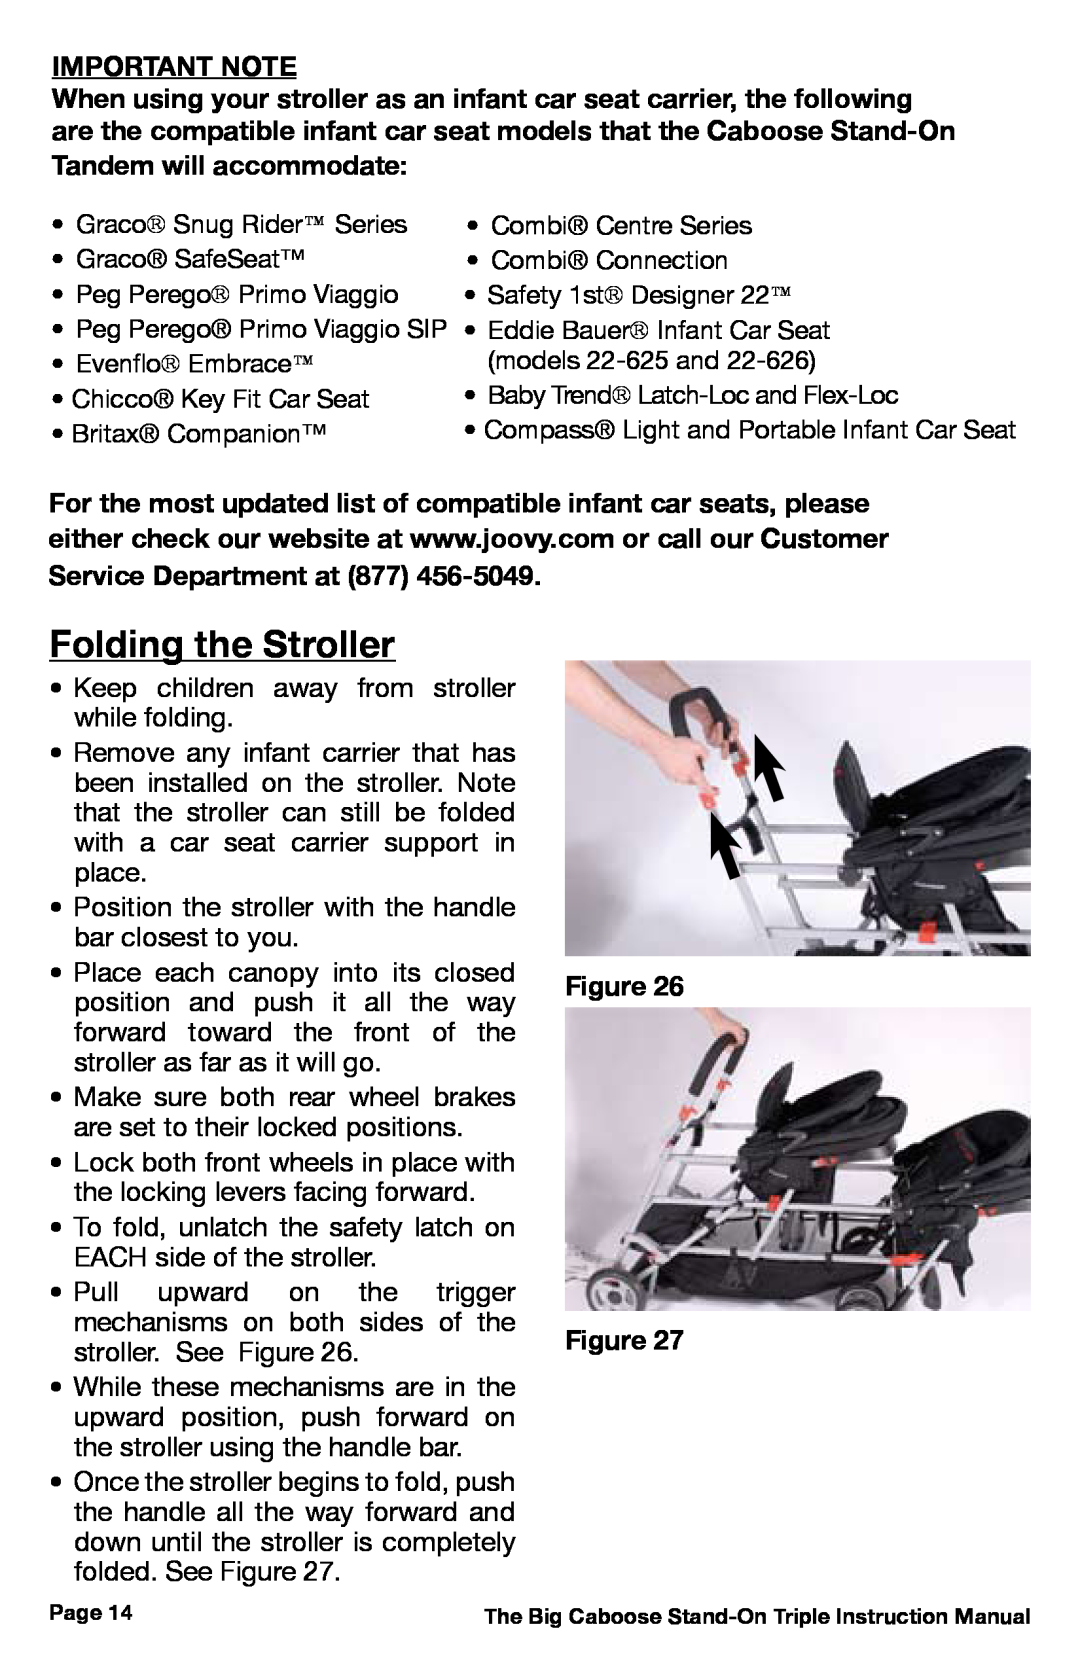 Chicco 437, 431, 430 manual Folding the Stroller, Important Note, Tandem will accommodate, Figure 6 Figure 7 